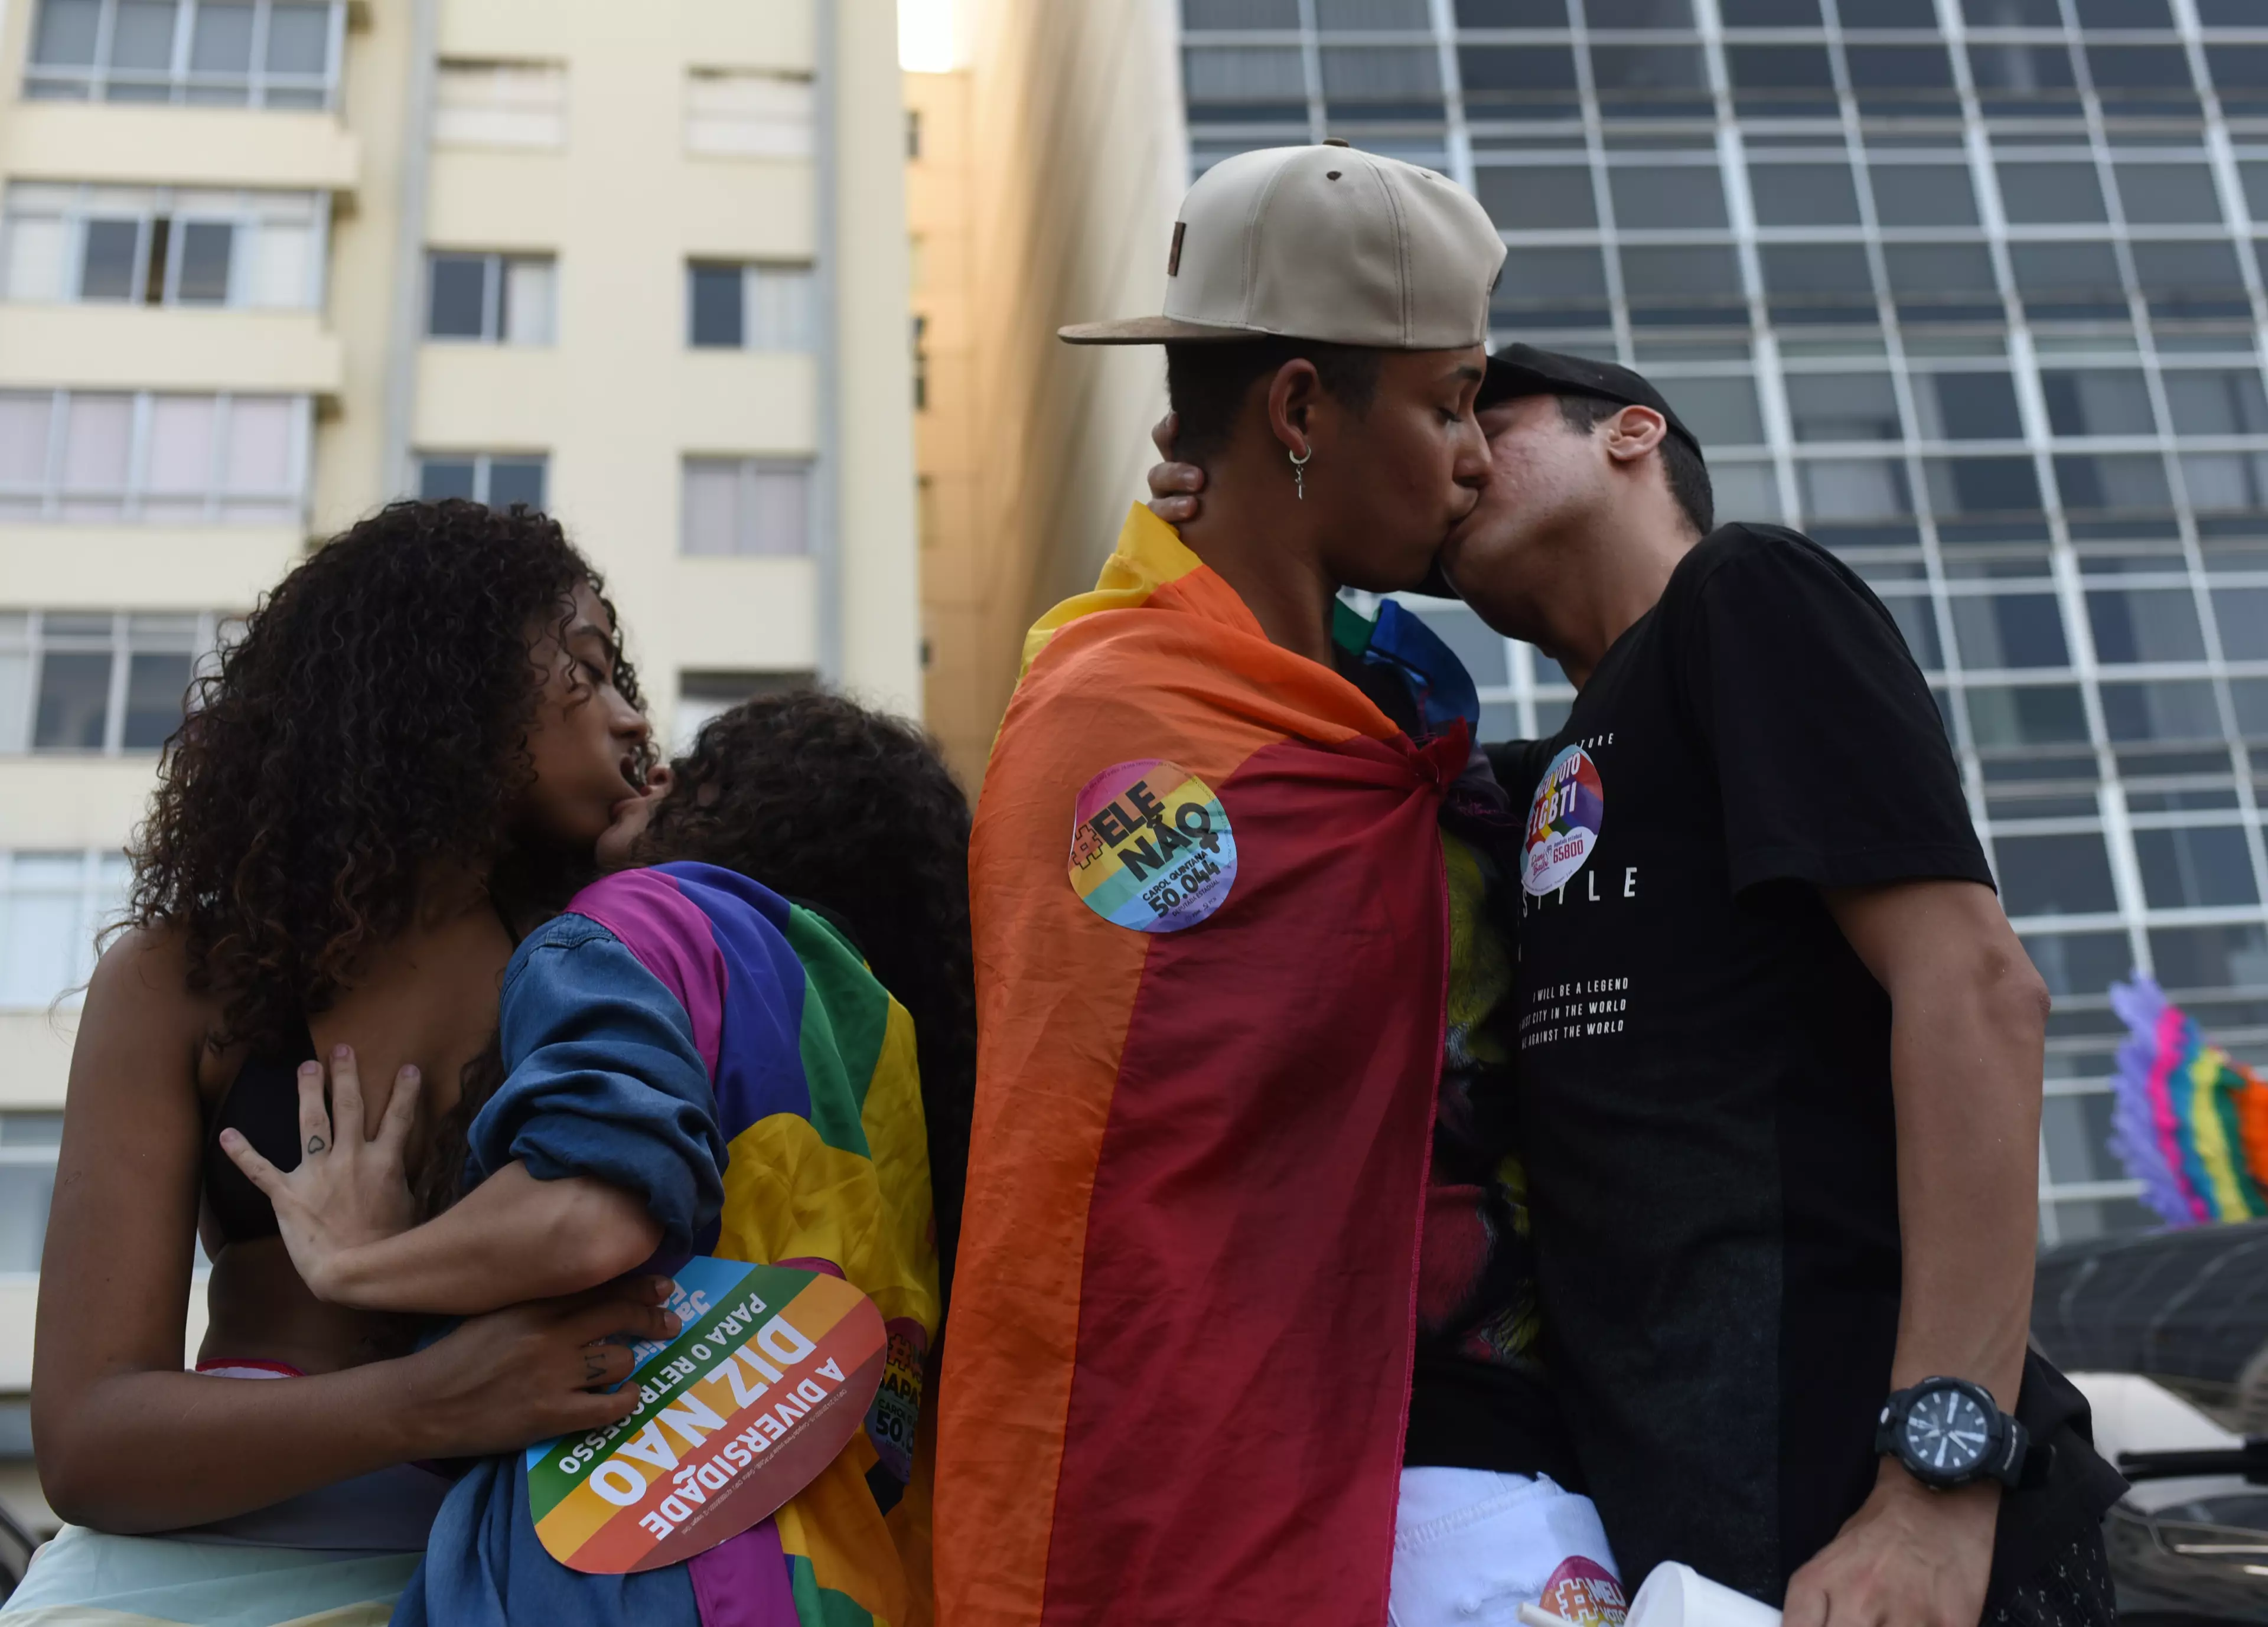 Brazil has voted to make homophobia and transphobia crimes.